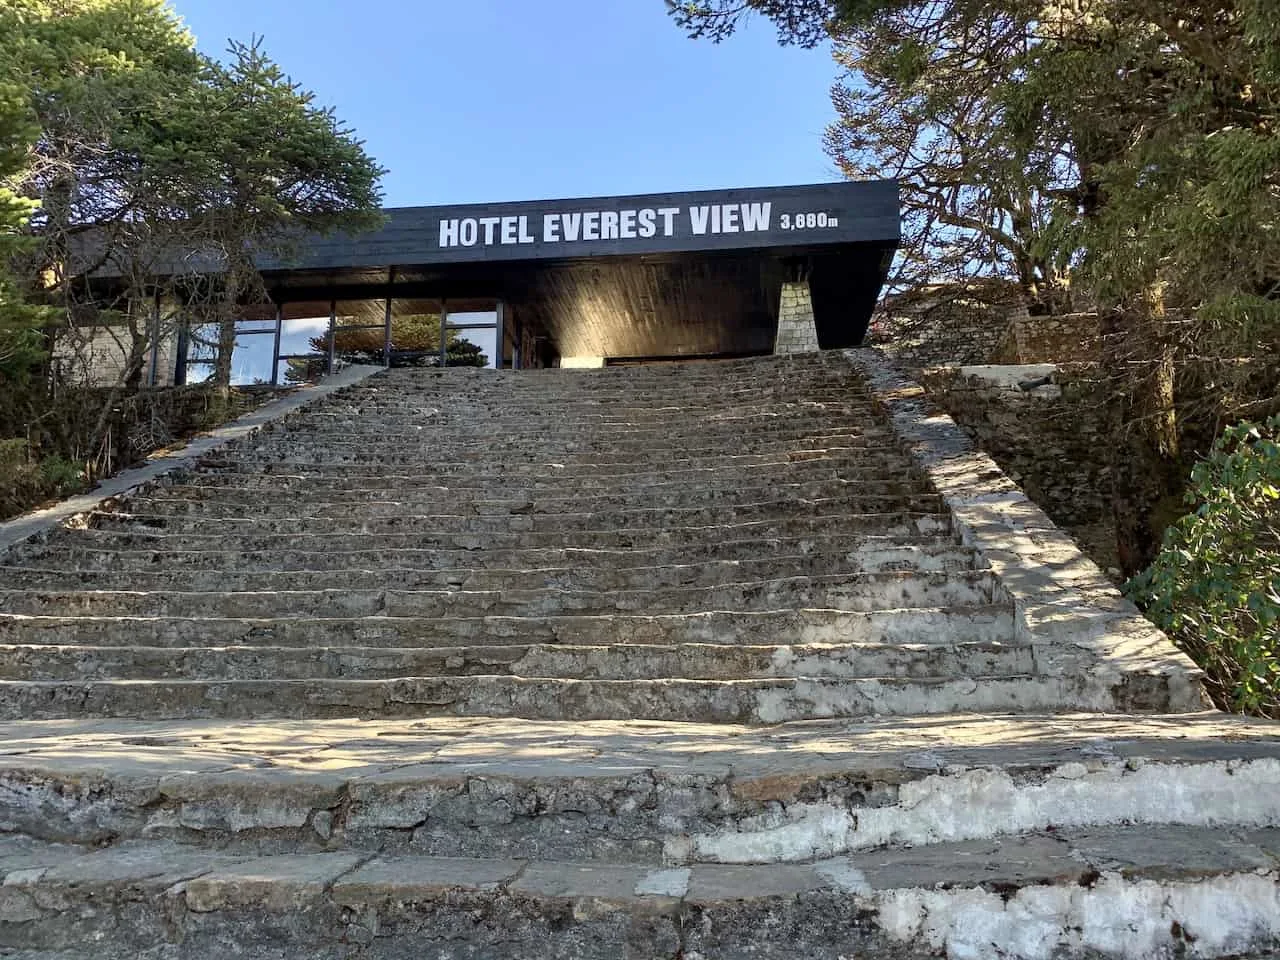 Hotel Everest View Entrance